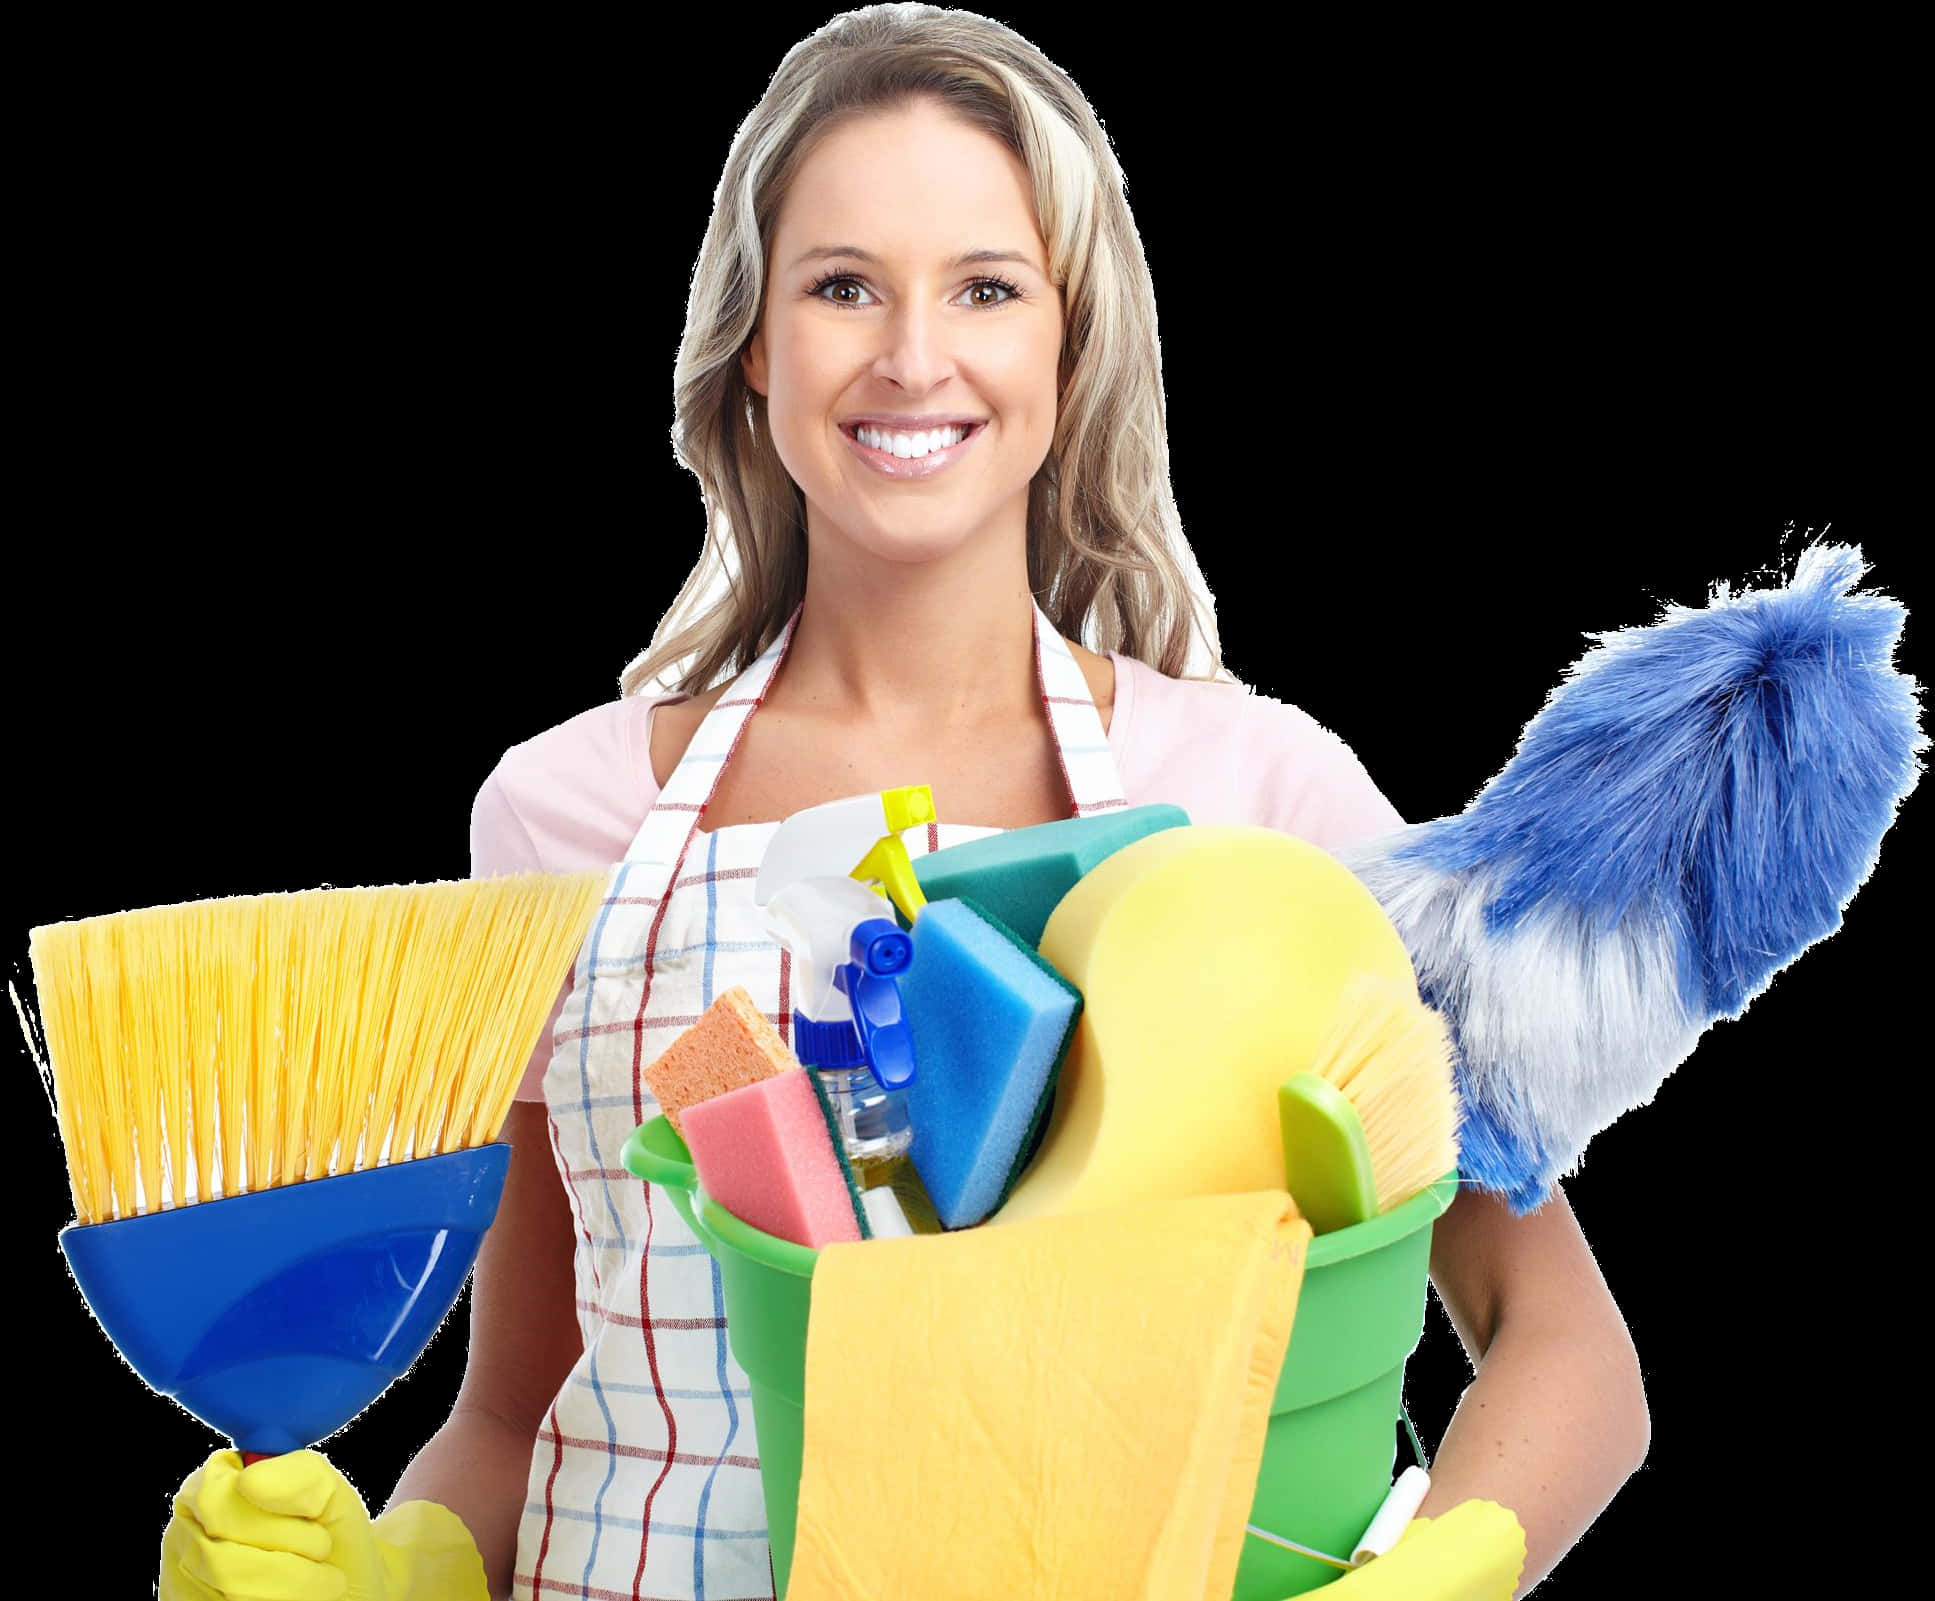 A Woman Holding A Bucket Of Cleaning Supplies